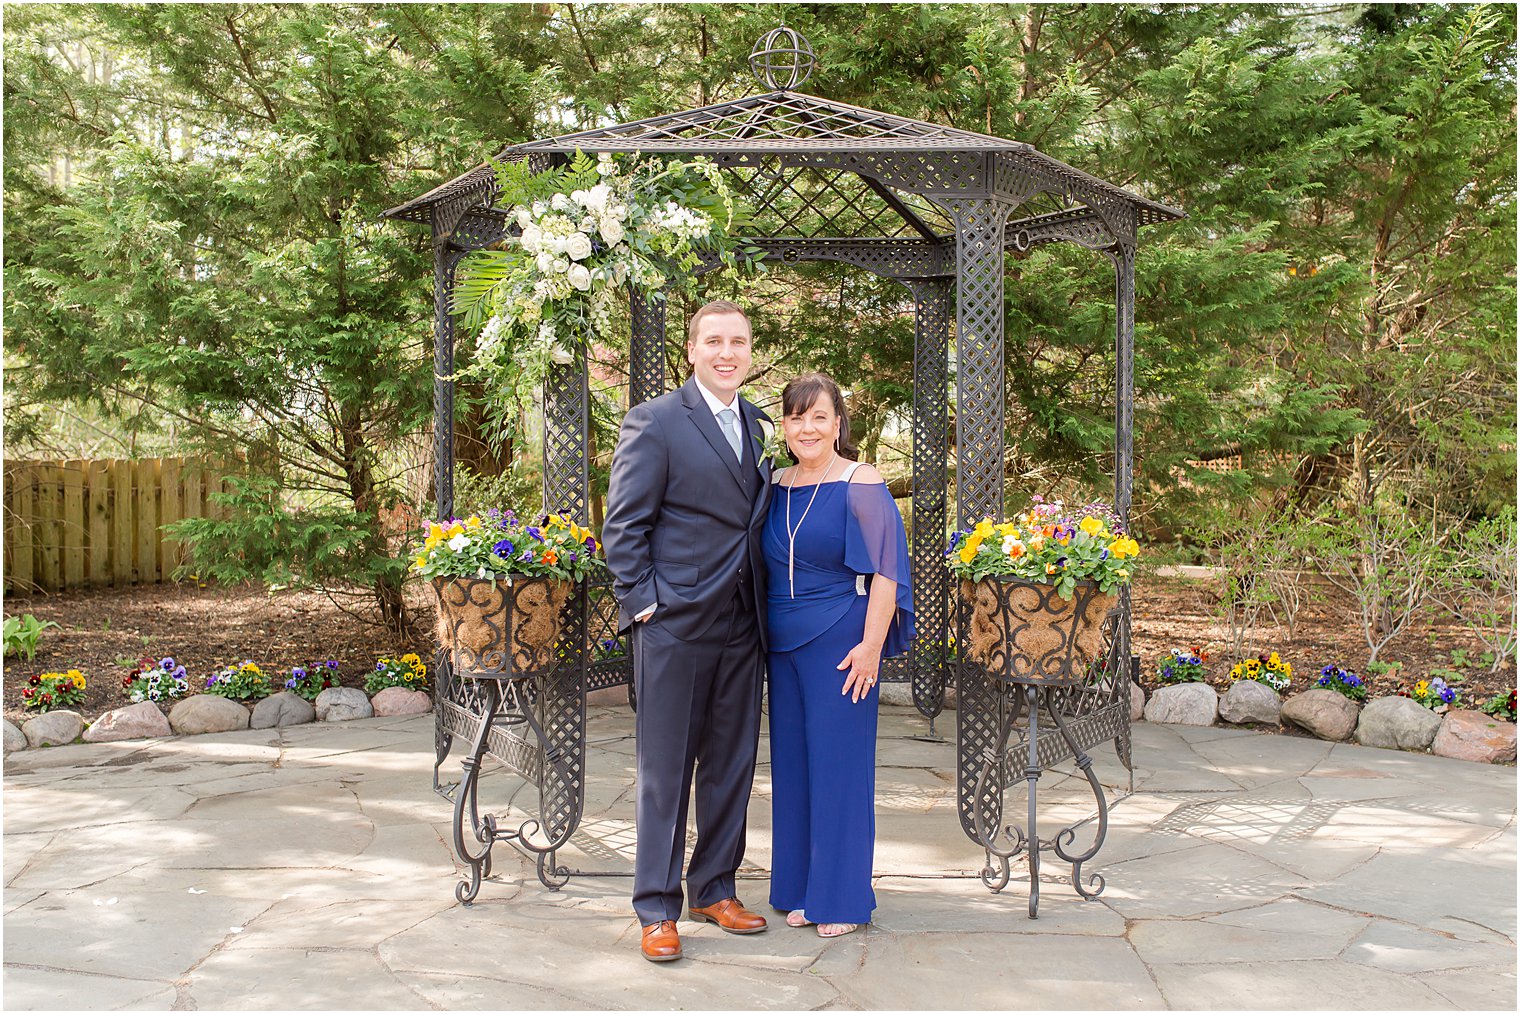 mother and son under gazebo for family formals on wedding day